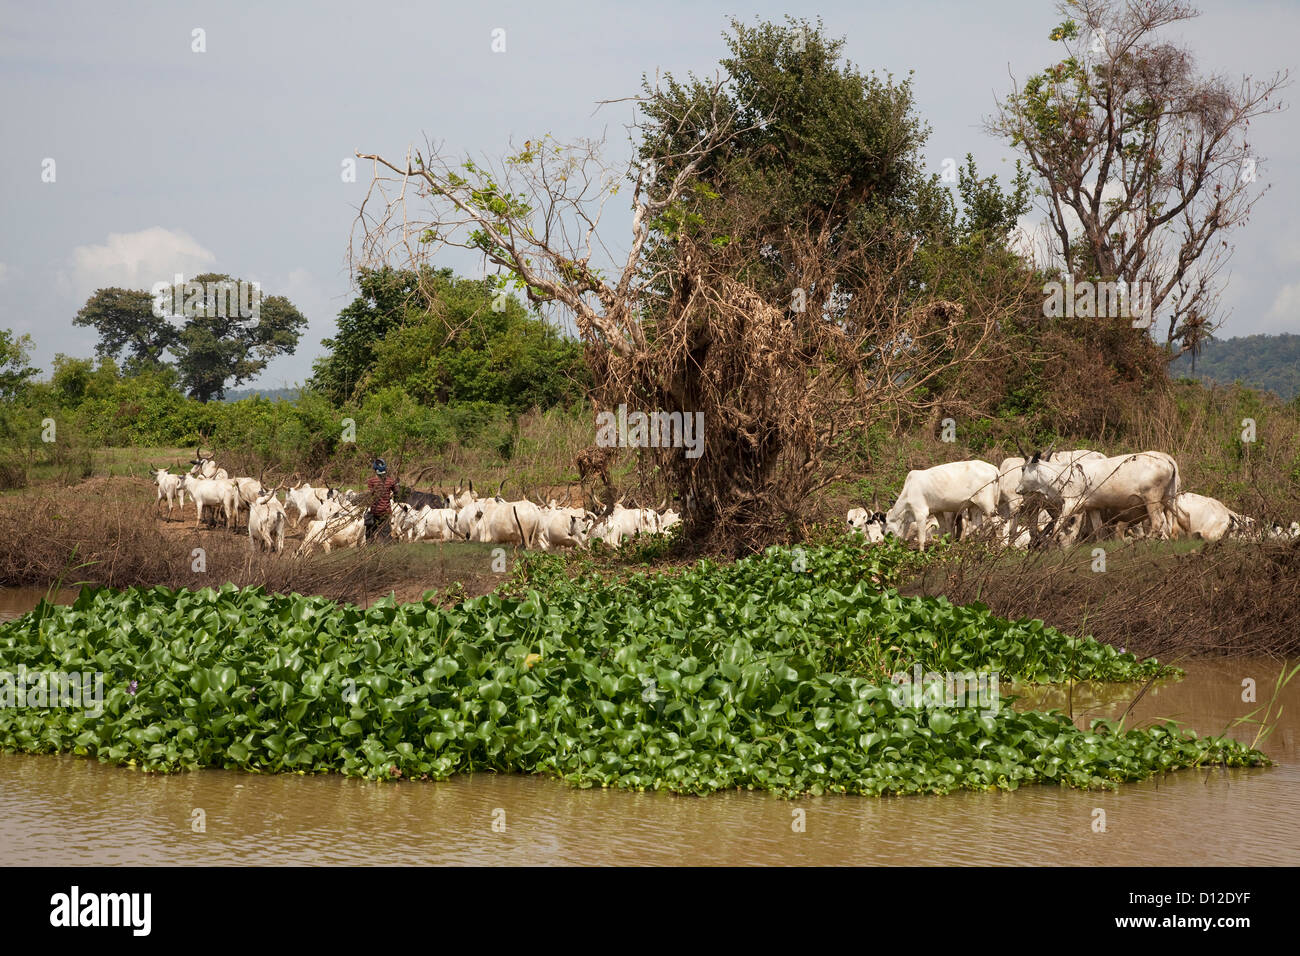 Herd of cattle on the banks of the River Niger, Kogi, Nigeria Stock Photo